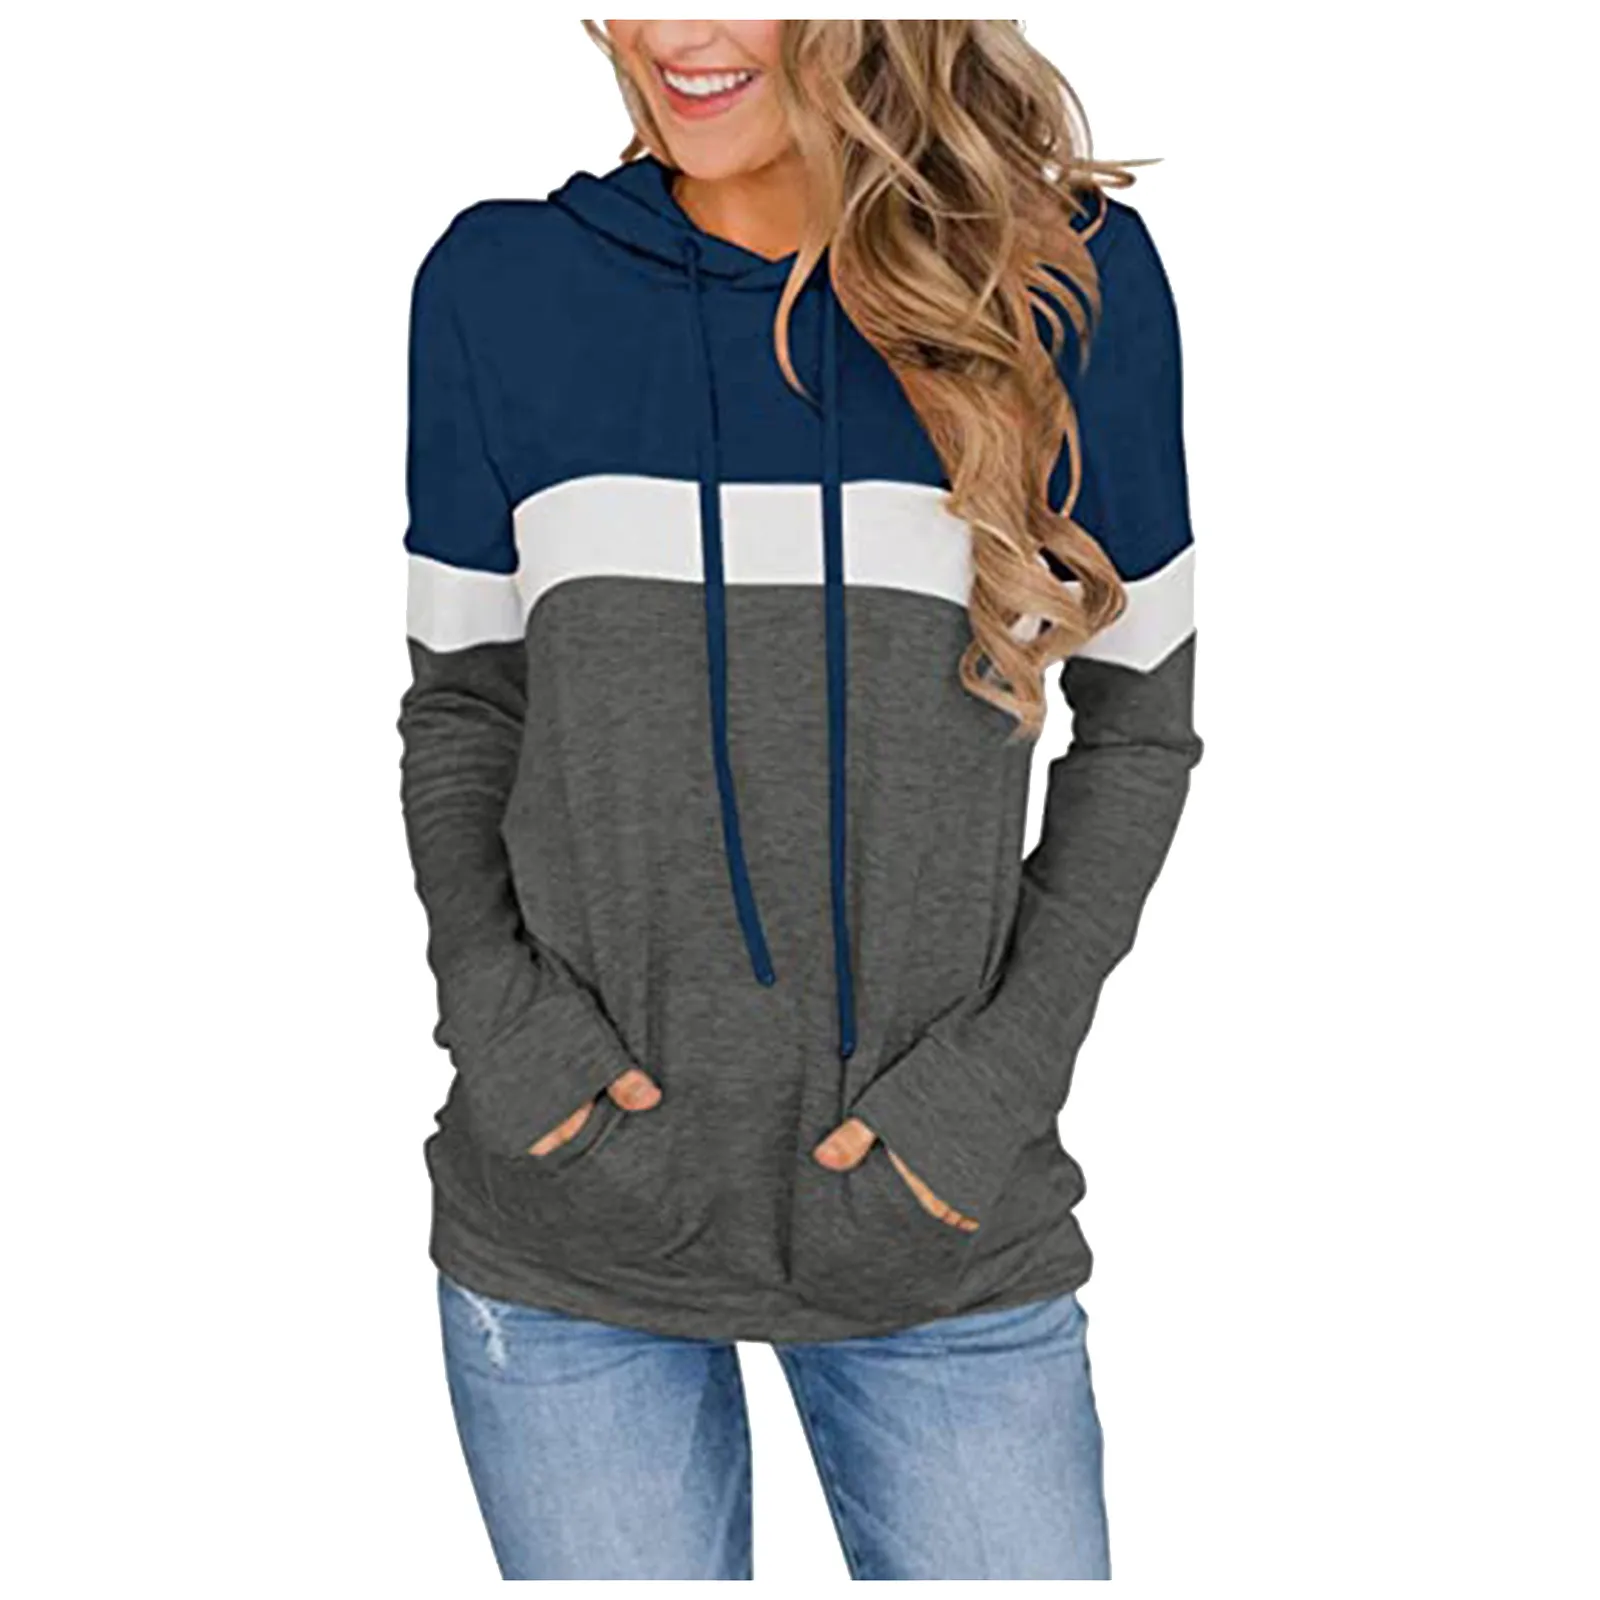 Cenlang Women's Casual Color Block Hoodies Tops Shirts Fall Long Sleeve Drawstring Pullover Plus Size Striped Printed Sweatshirts with Pocket 